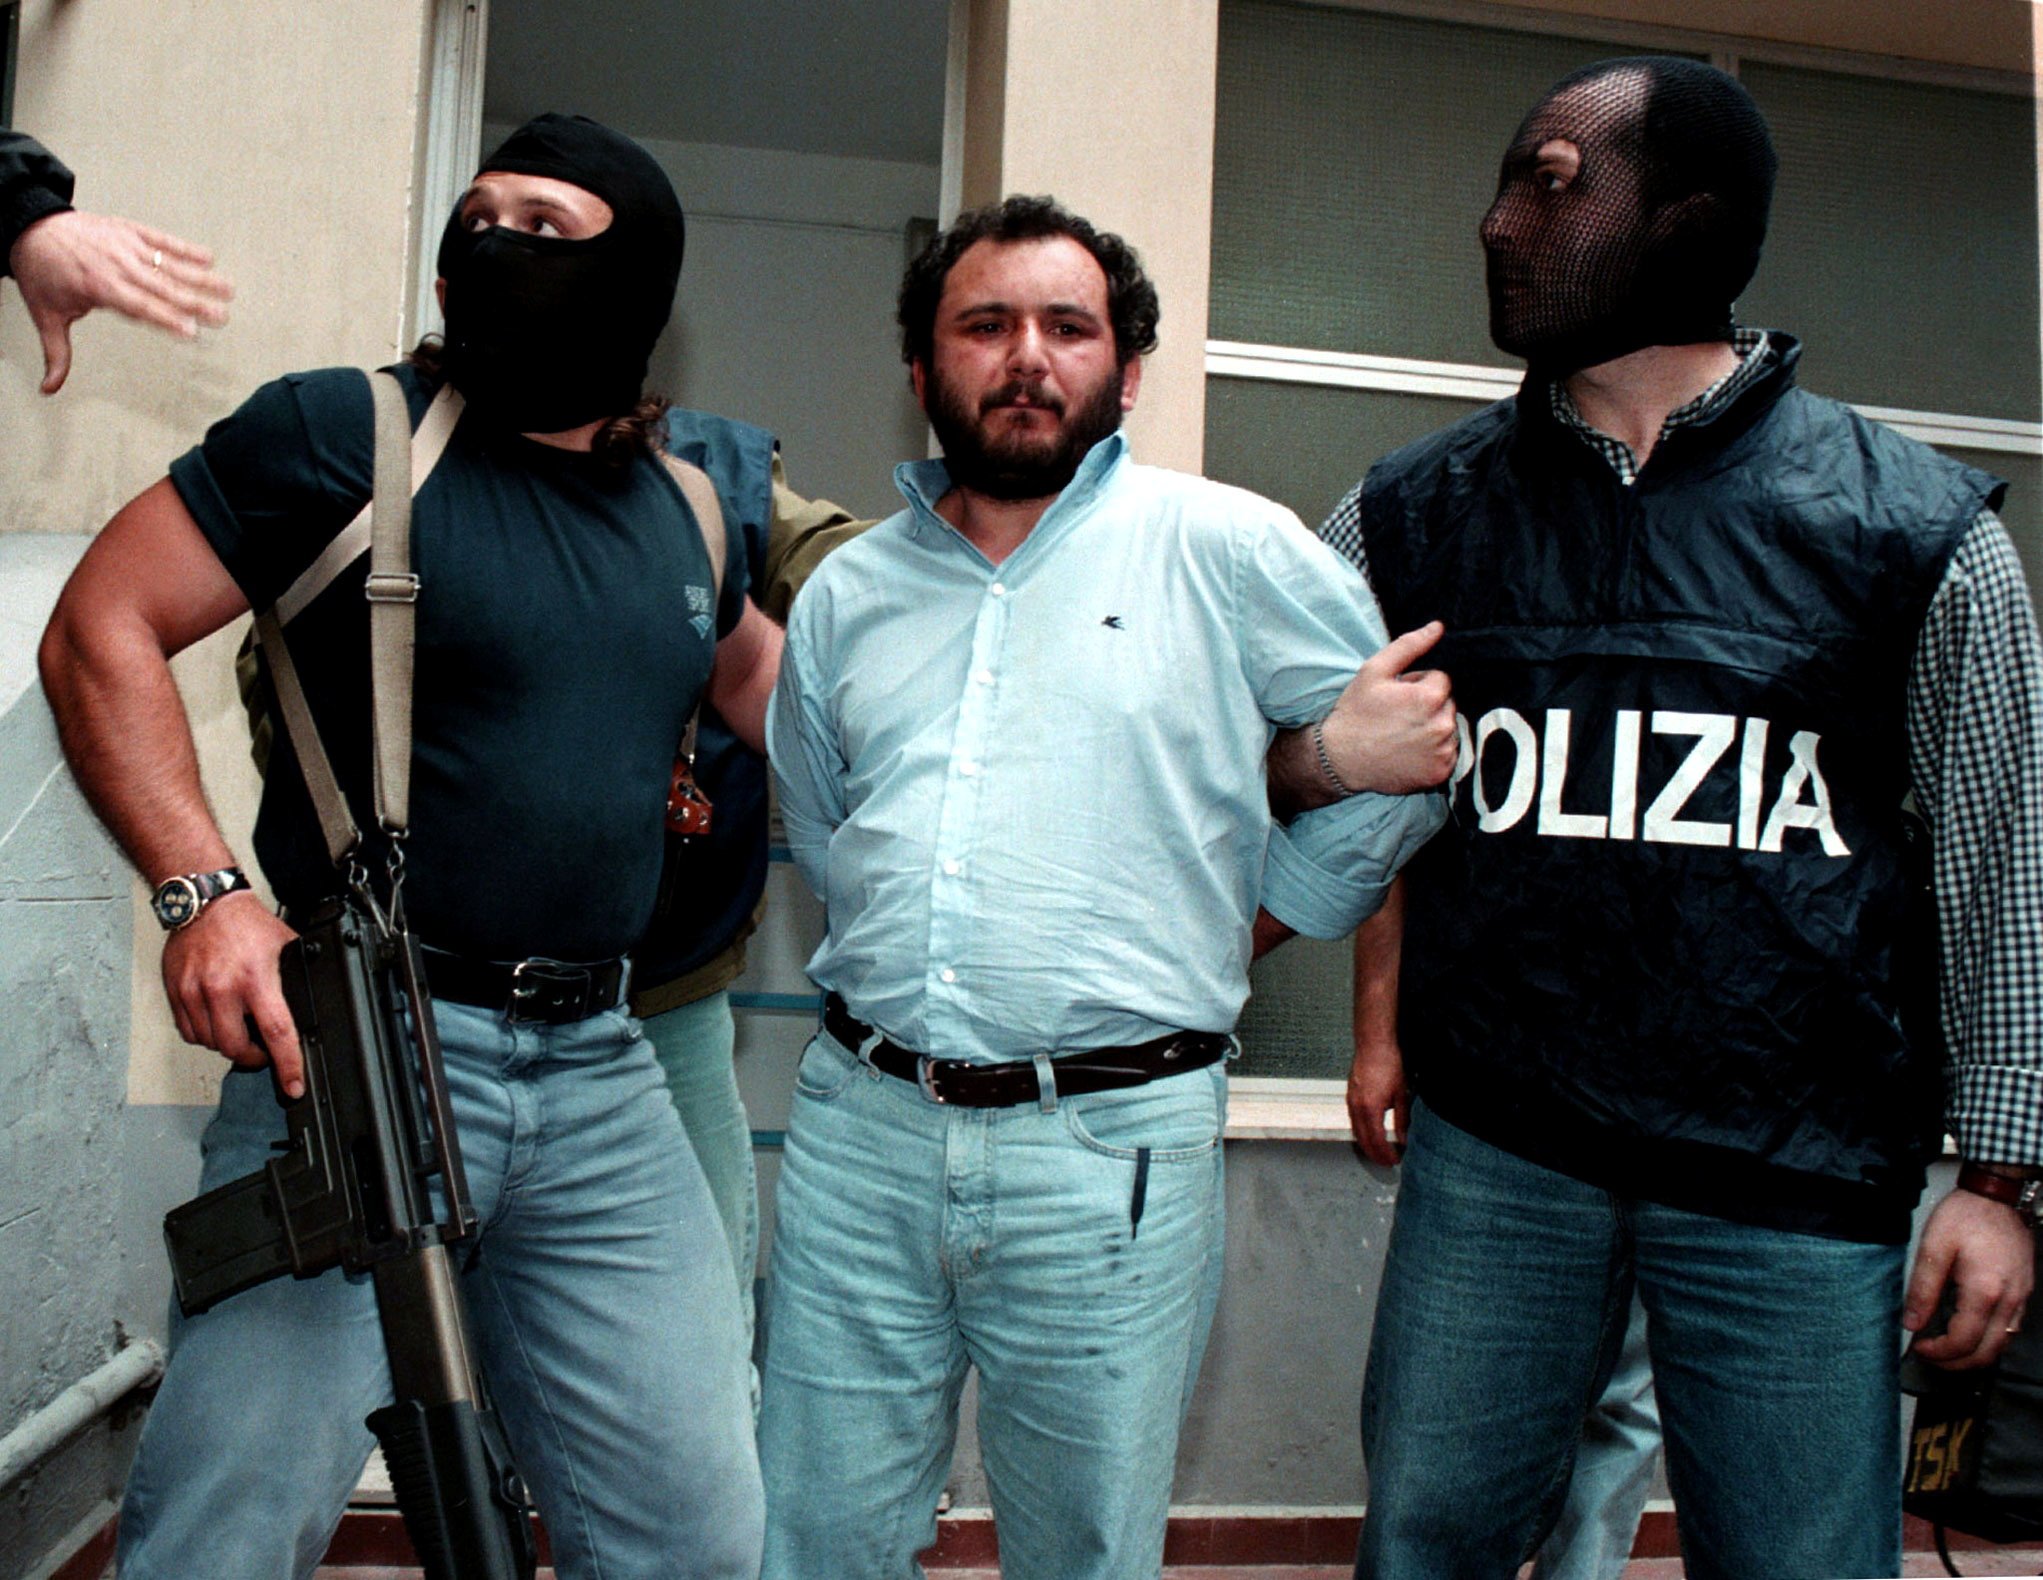 Anti-Mafia police, wearing masks to hide their identity, escort top Mafia fugitive Giovani Brusca as he leaves Palermo's police headquarters to be taken to a maximum security prison, in Palermo, Italy, in this May 21, 1996, file photo.